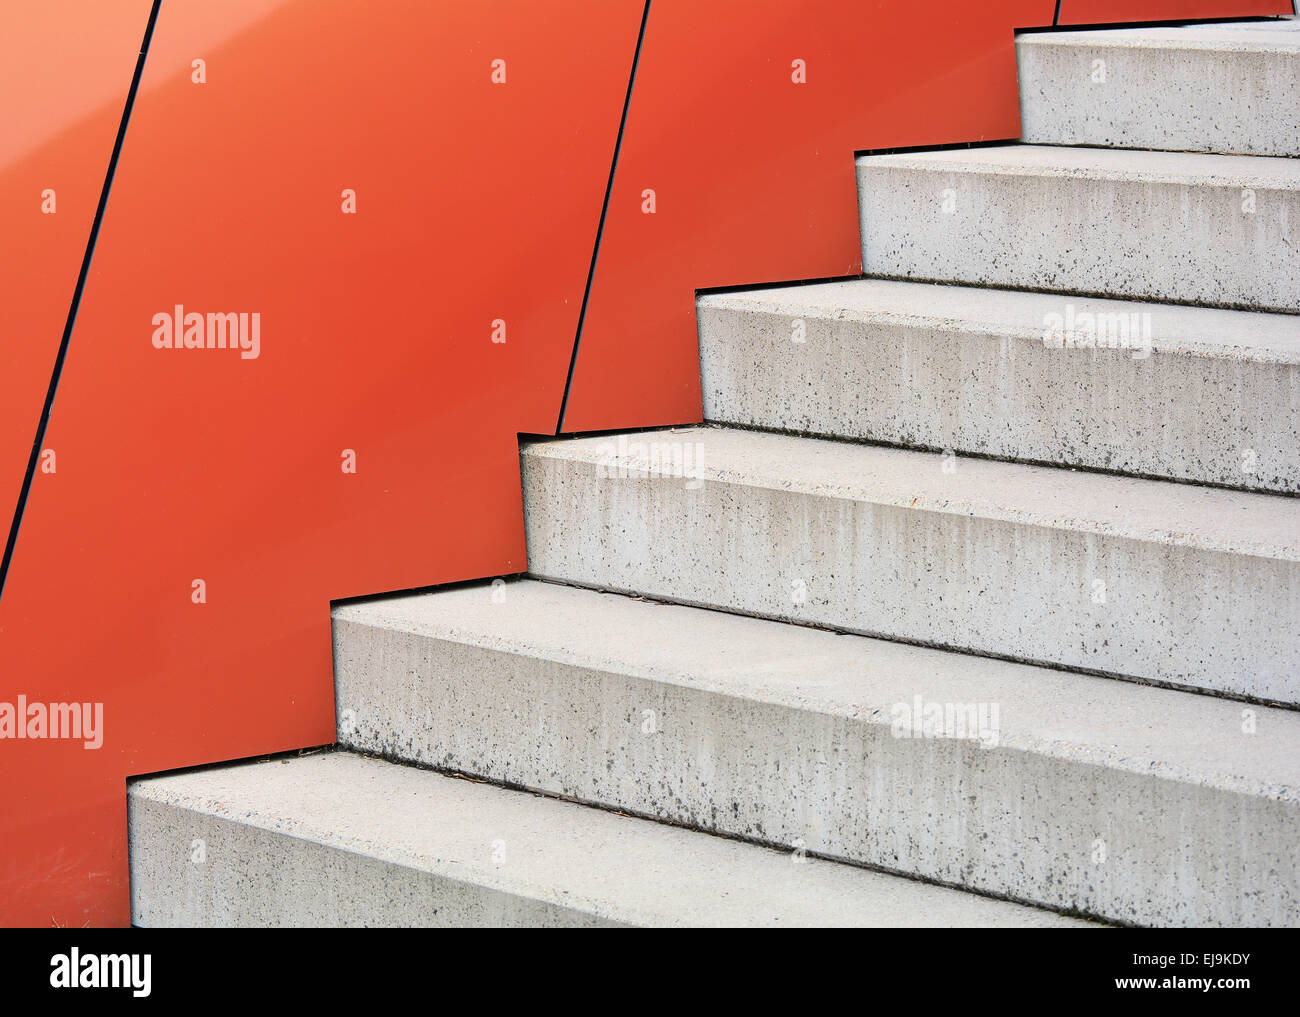 staircase and red facade Stock Photo